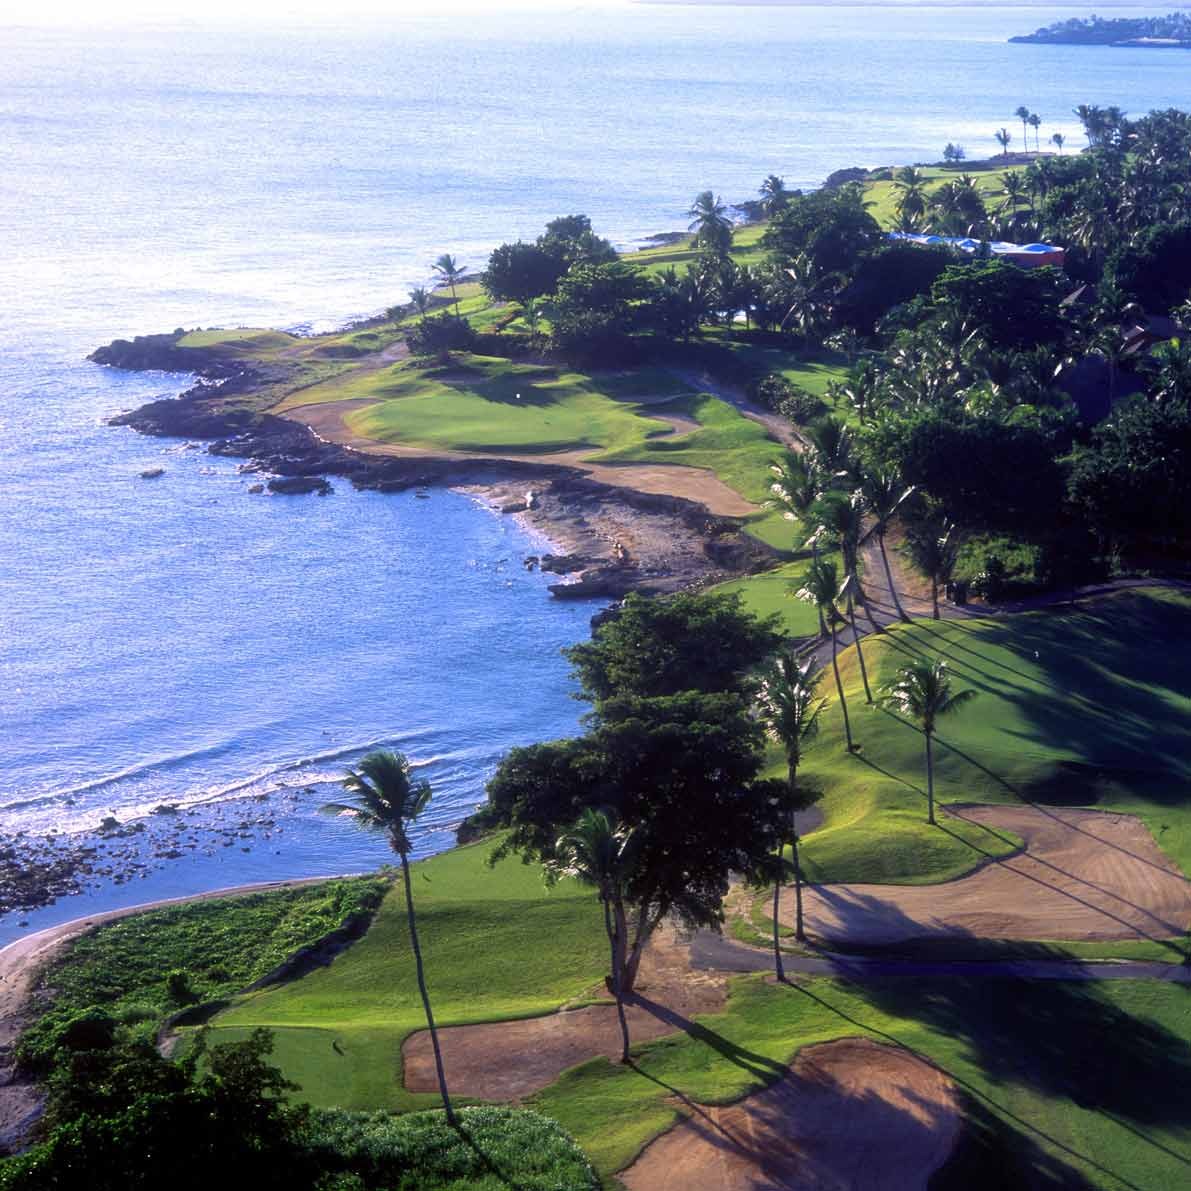 Golf Vacation Package - Time for your Group Getaway? Casa de Campo Villa & Teeth Of The Dog from $646 per day!